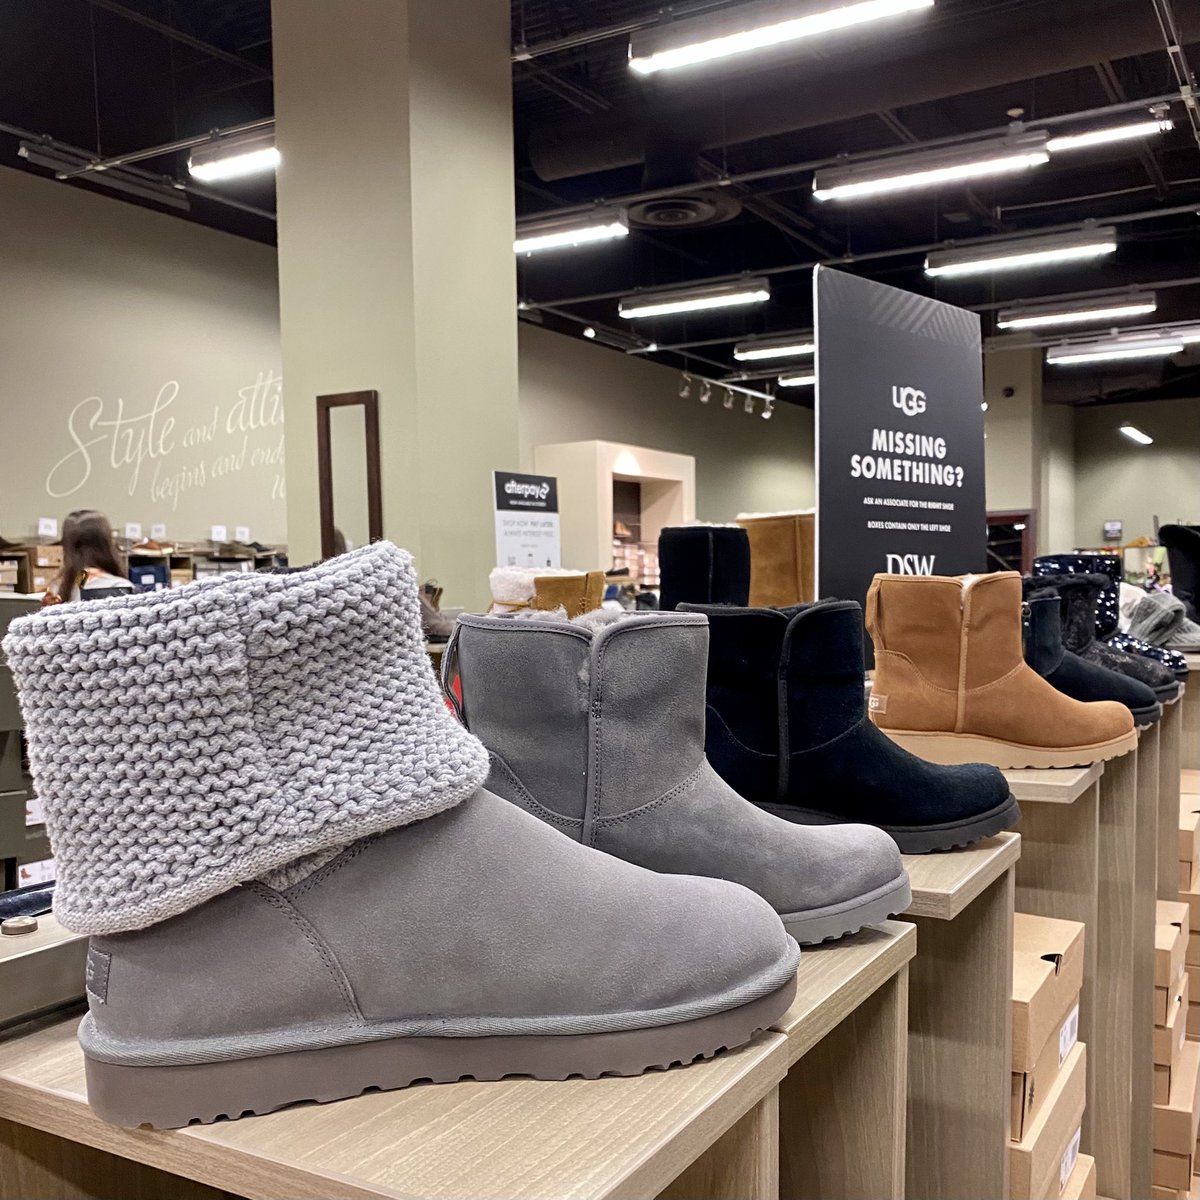 Holyoke Mall on Twitter: "Freezing temps 🥶 call for super warm boots and  slippers!! Check out the @UGG selection at @journeys and @dsw_us! 👢🥾🥿  #holyokemall #westernmass #ugg #journeys #dsw https://t.co/0HuUucVXt1" /  Twitter